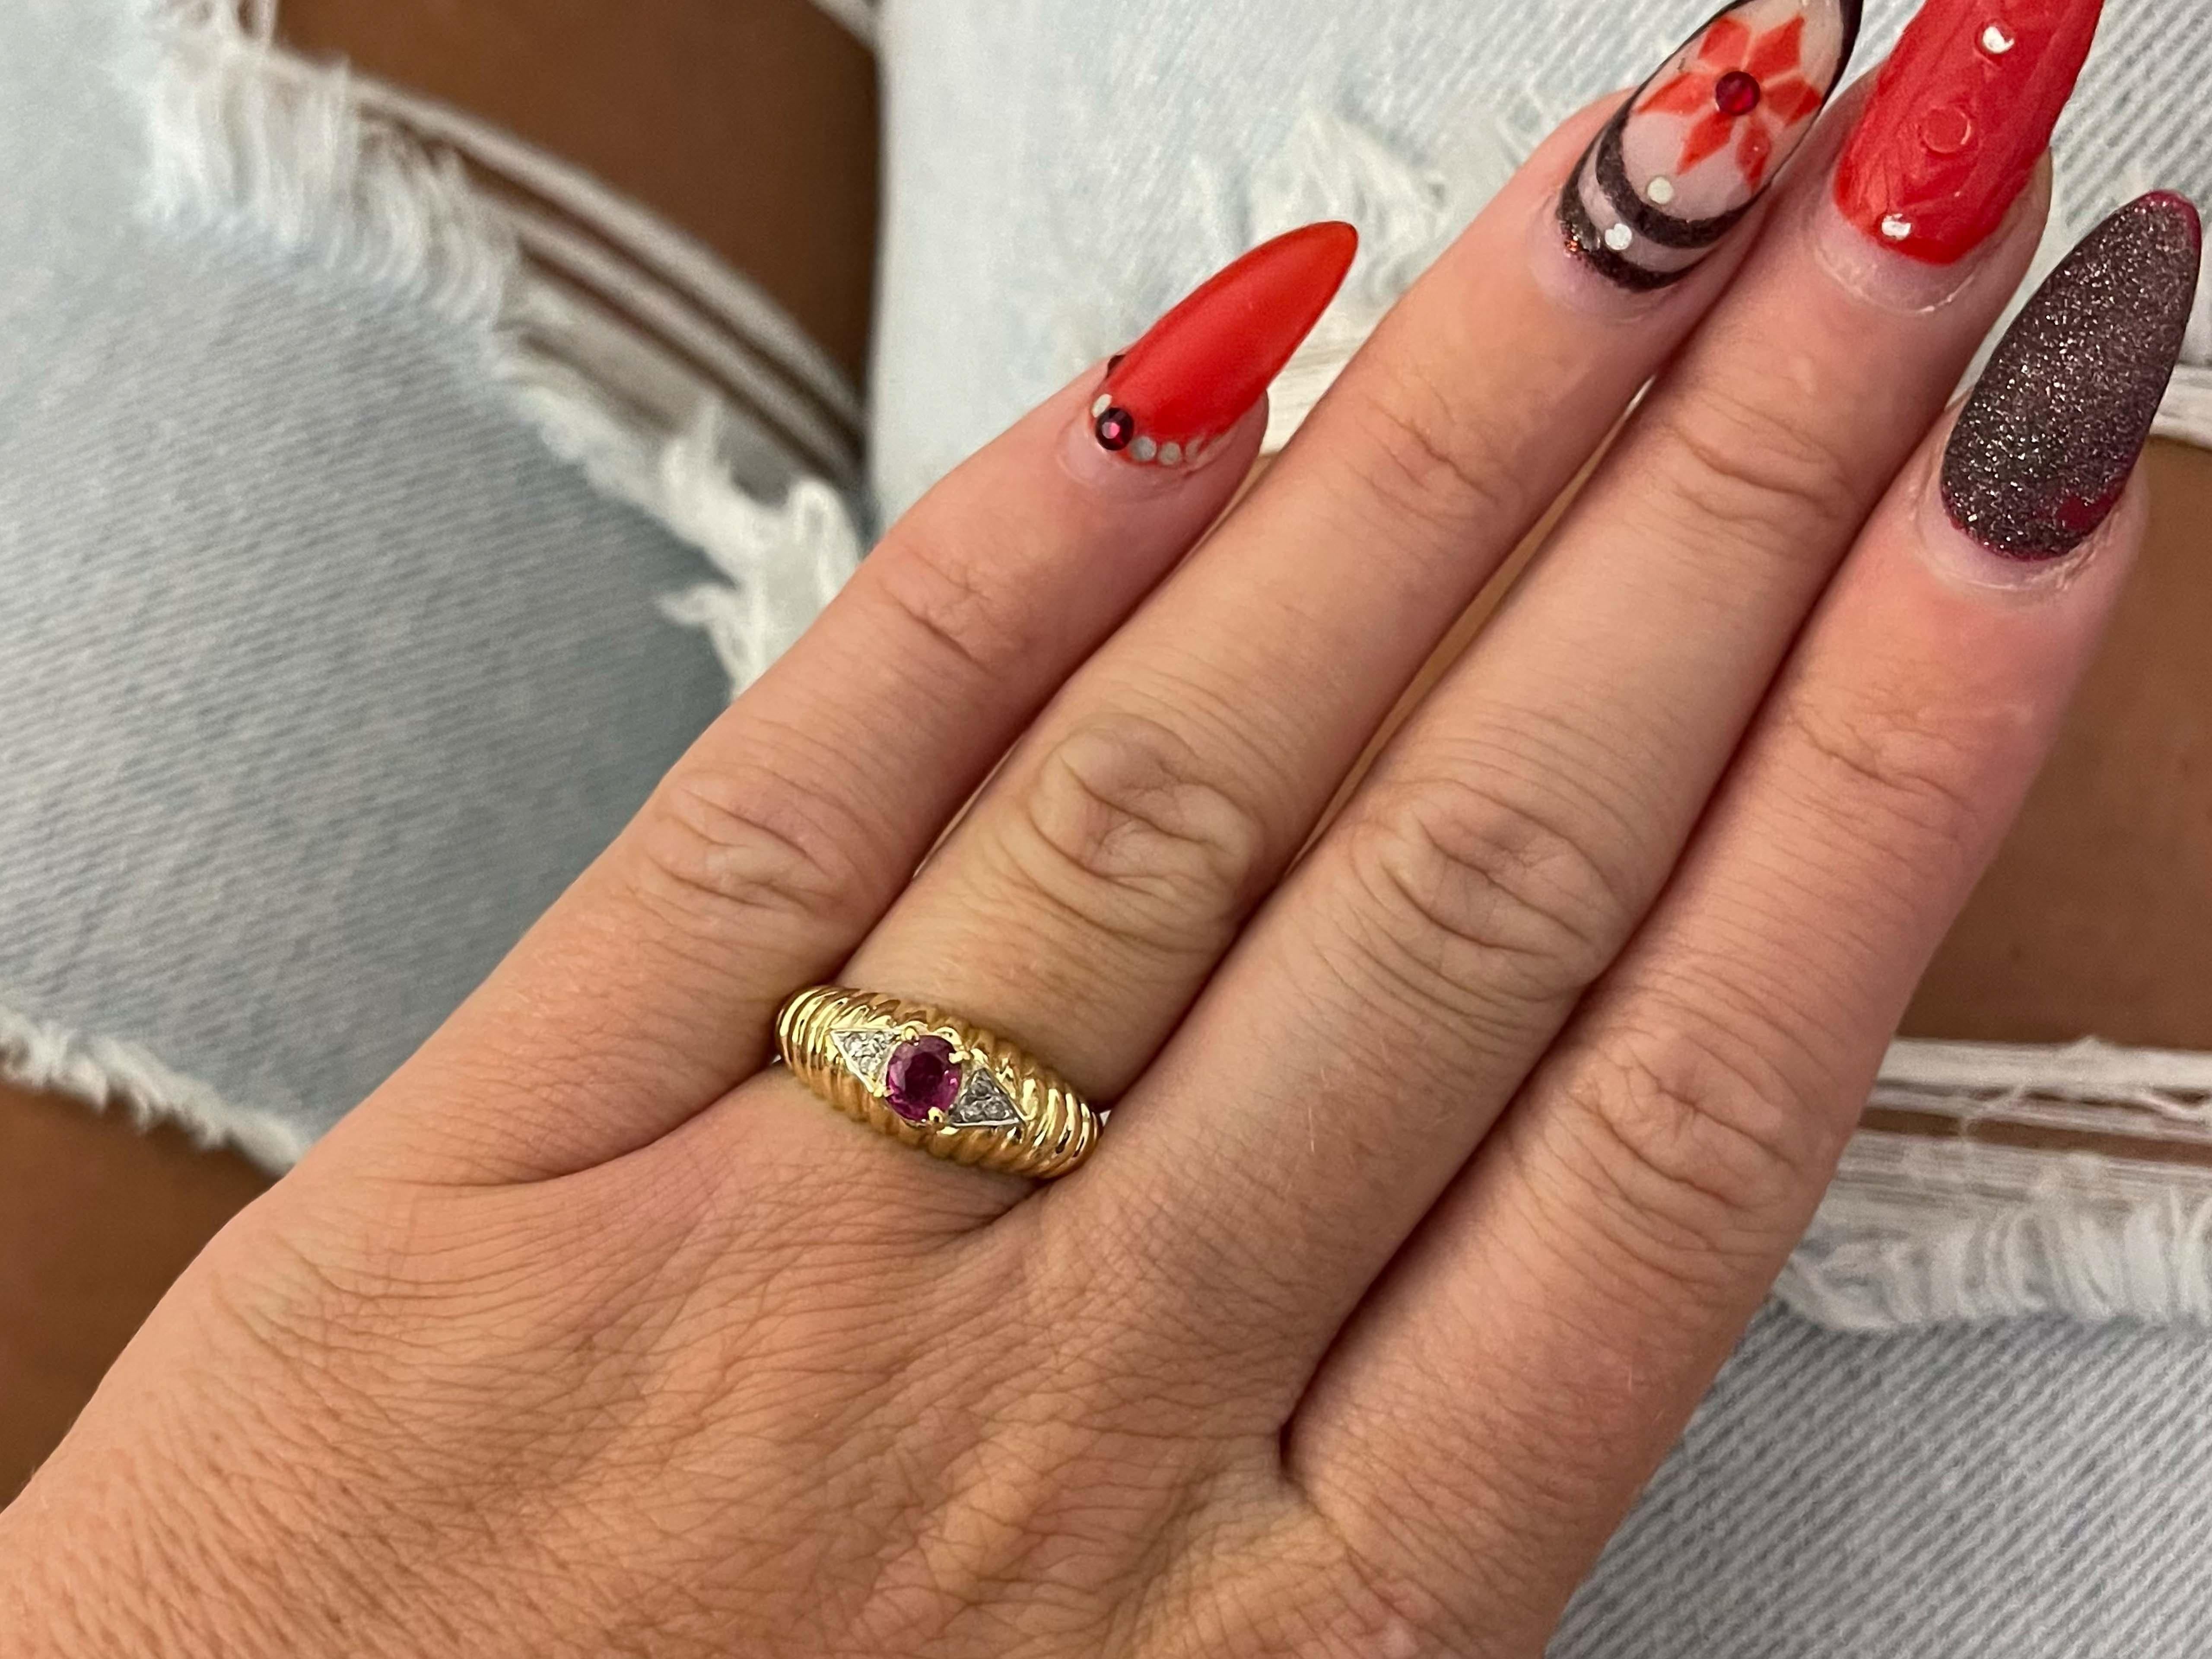 Item Specifications:

Metal: 14K Yellow Gold

Style: Statement Ring

Ring Size: 6.5 (resizing available for a fee)

Total Weight: 3.1 Grams

Ring Height: 7.6 mm

Gemstone Specifications:

Gemstone: 1 Ruby

Shape: Oval

Ruby Measurements: ~ 4.69mm x